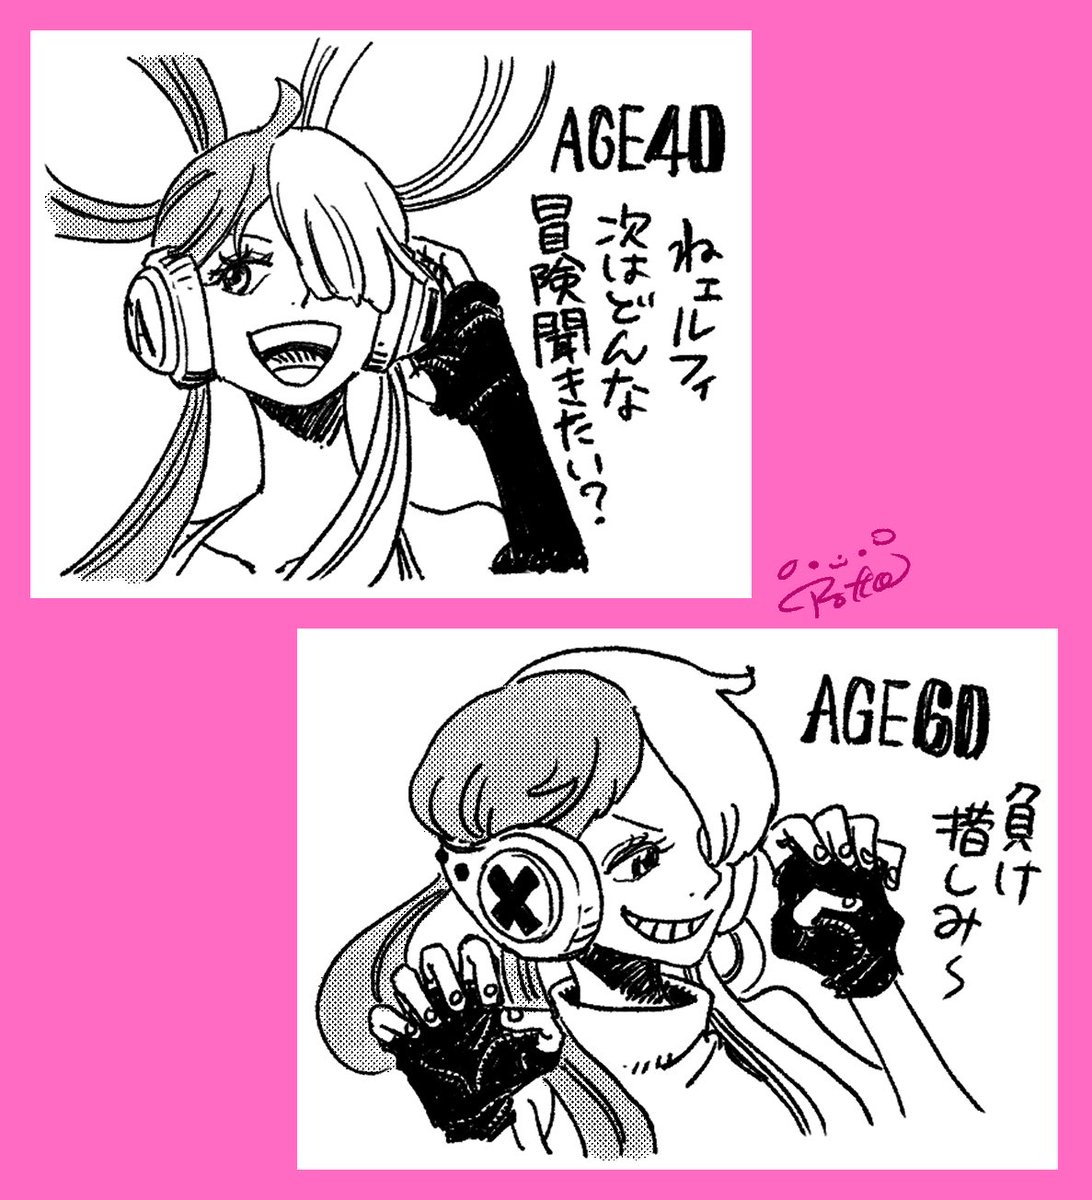 AGE20&40 ウタ
※非公式(Unofficial) 